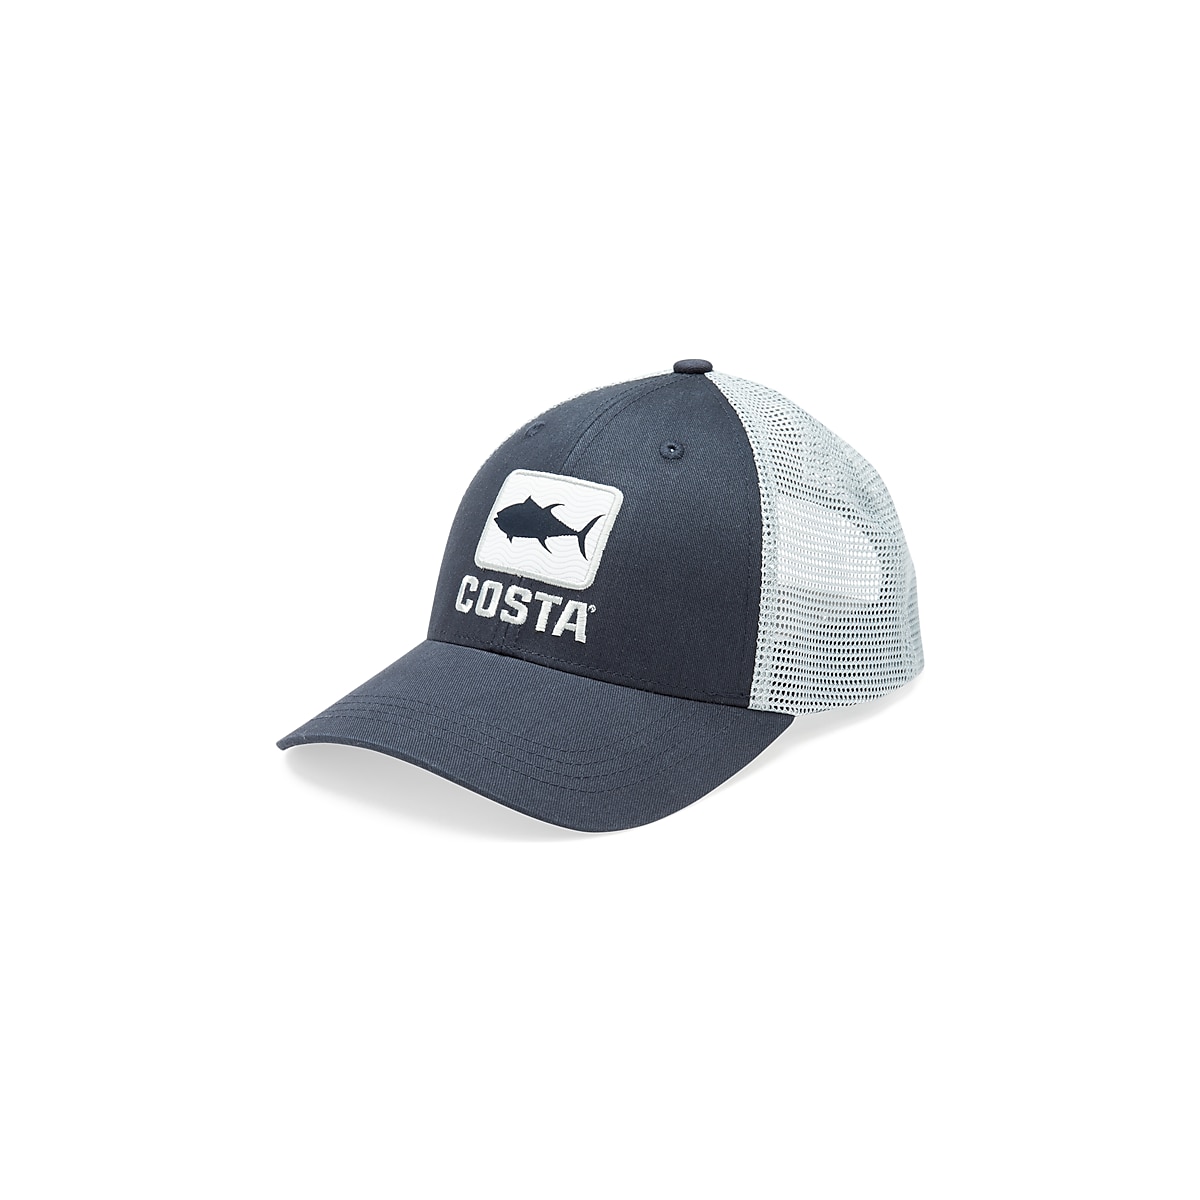 New shipment of Costa Hats. - Downtown Bait & Tackle Shop